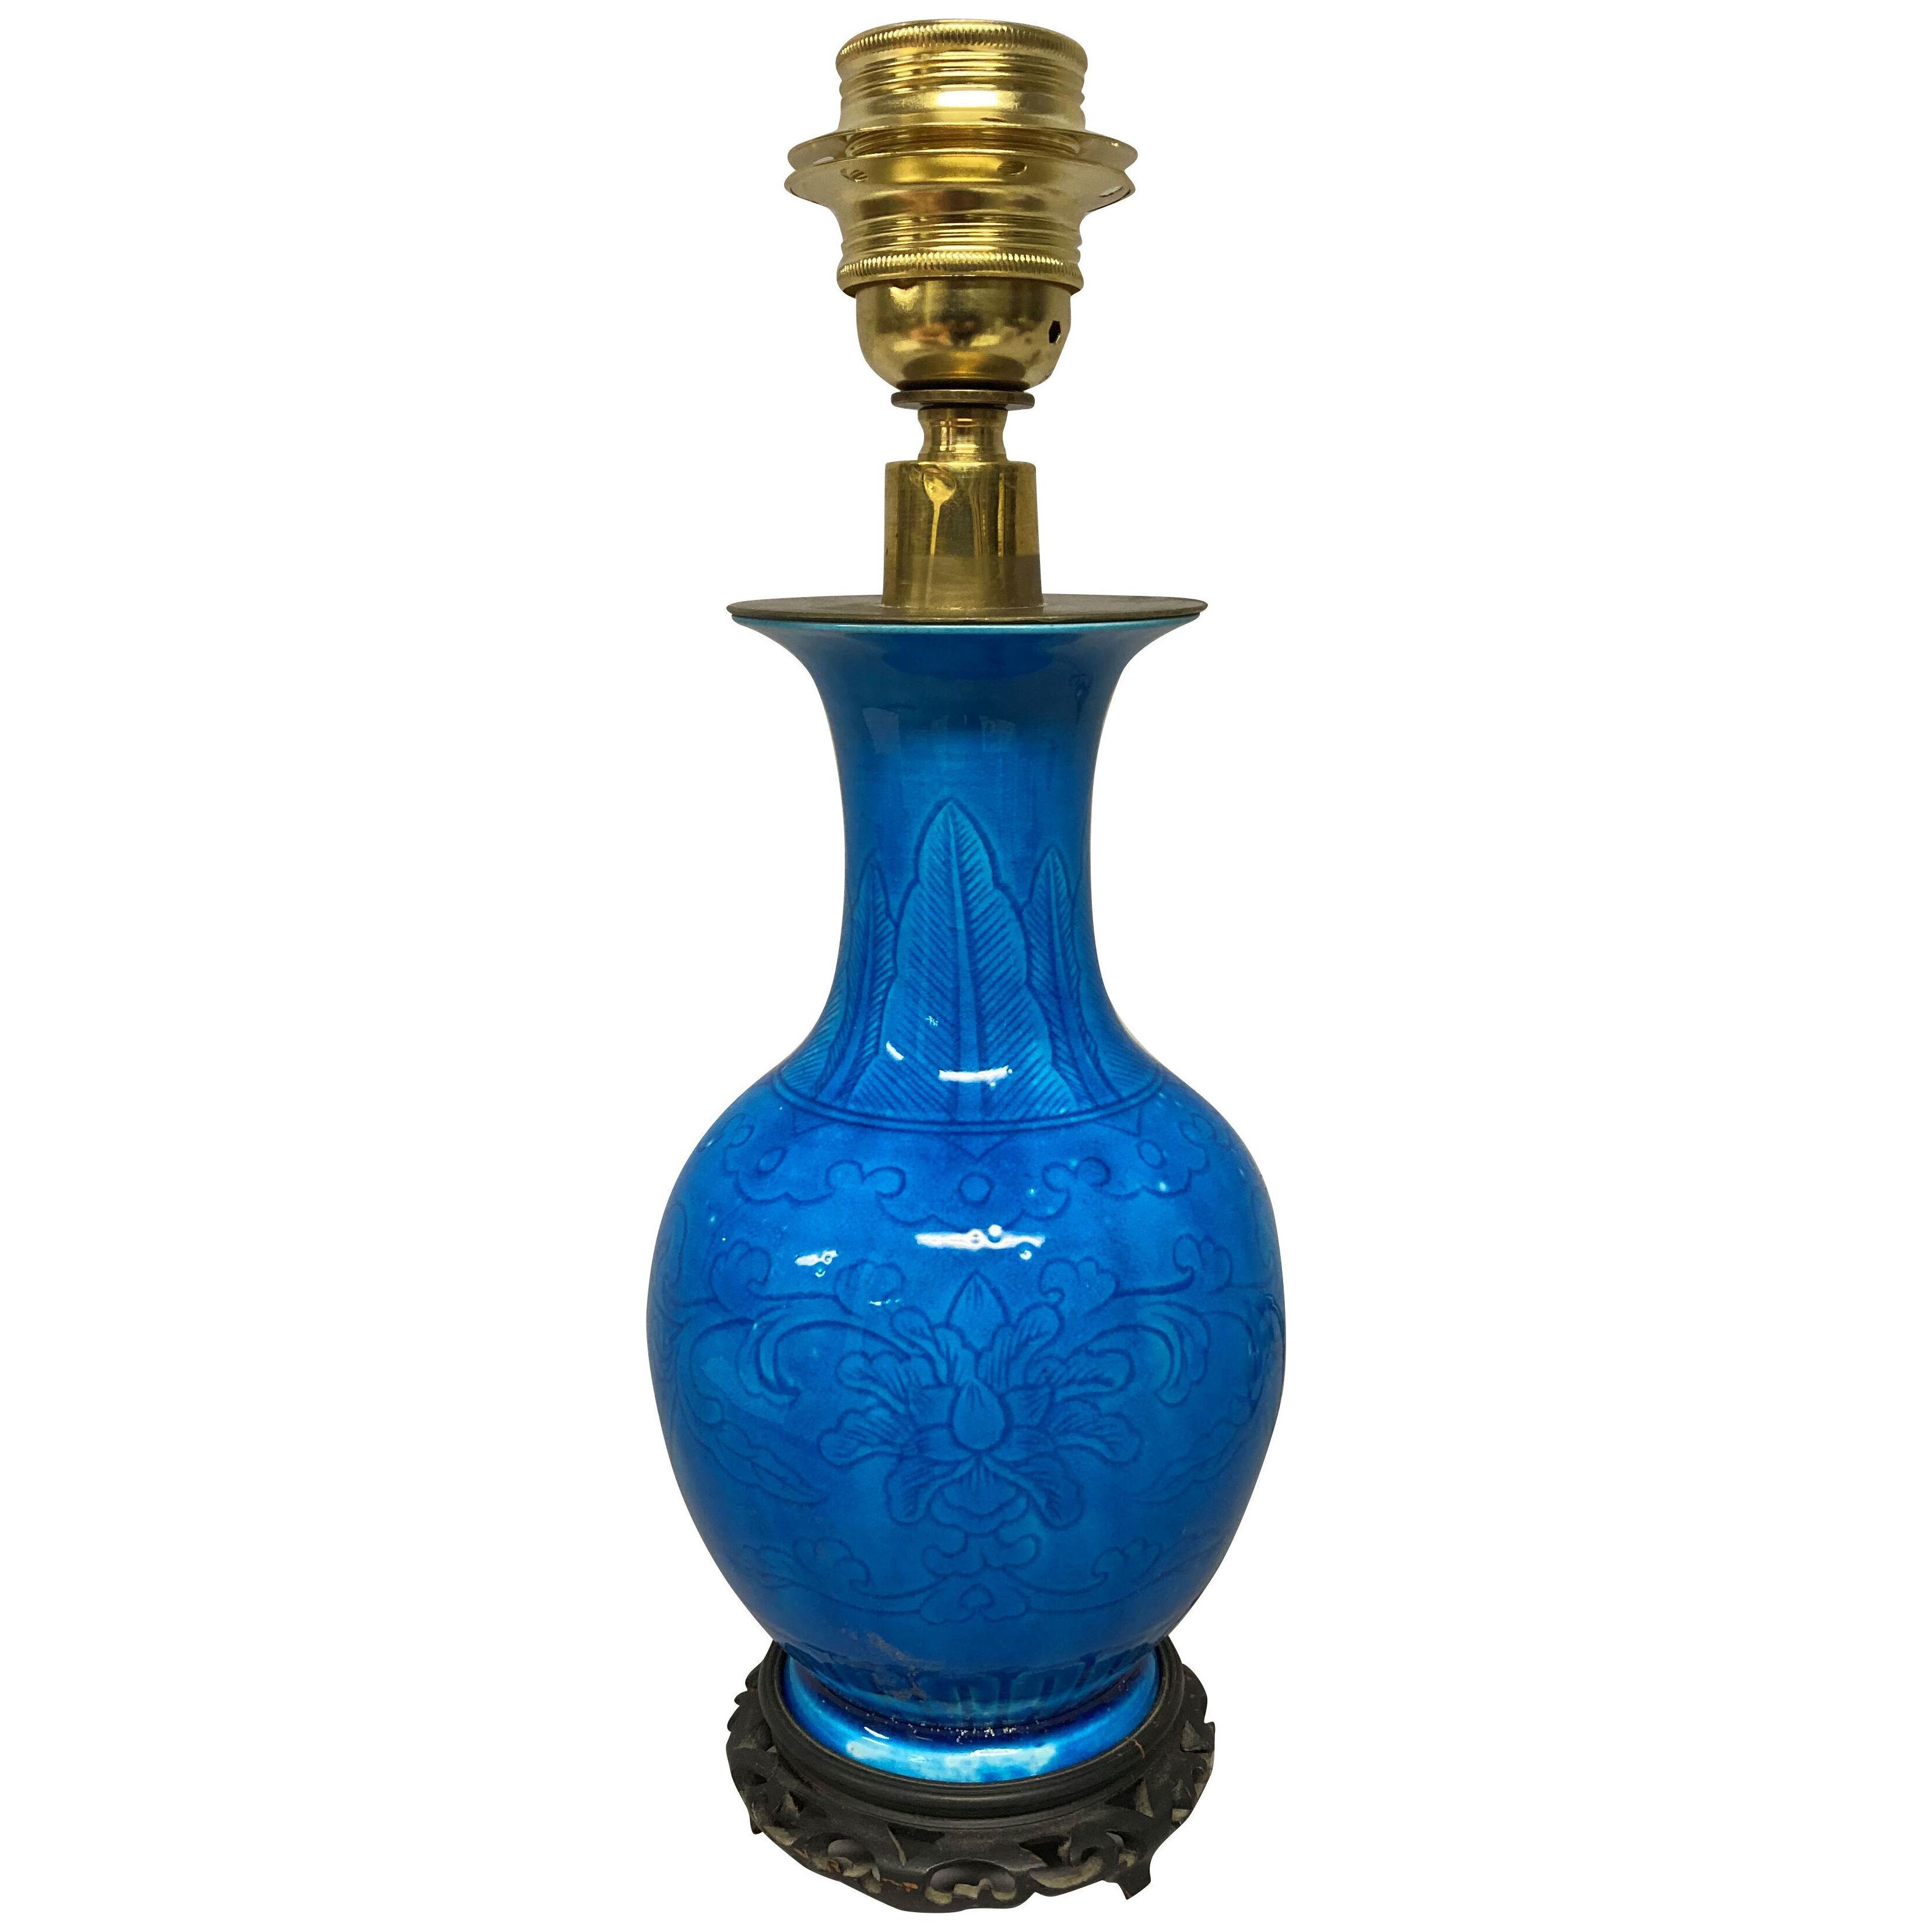 A CHINESE BLUE GLAZED PORCELAIN LAMP